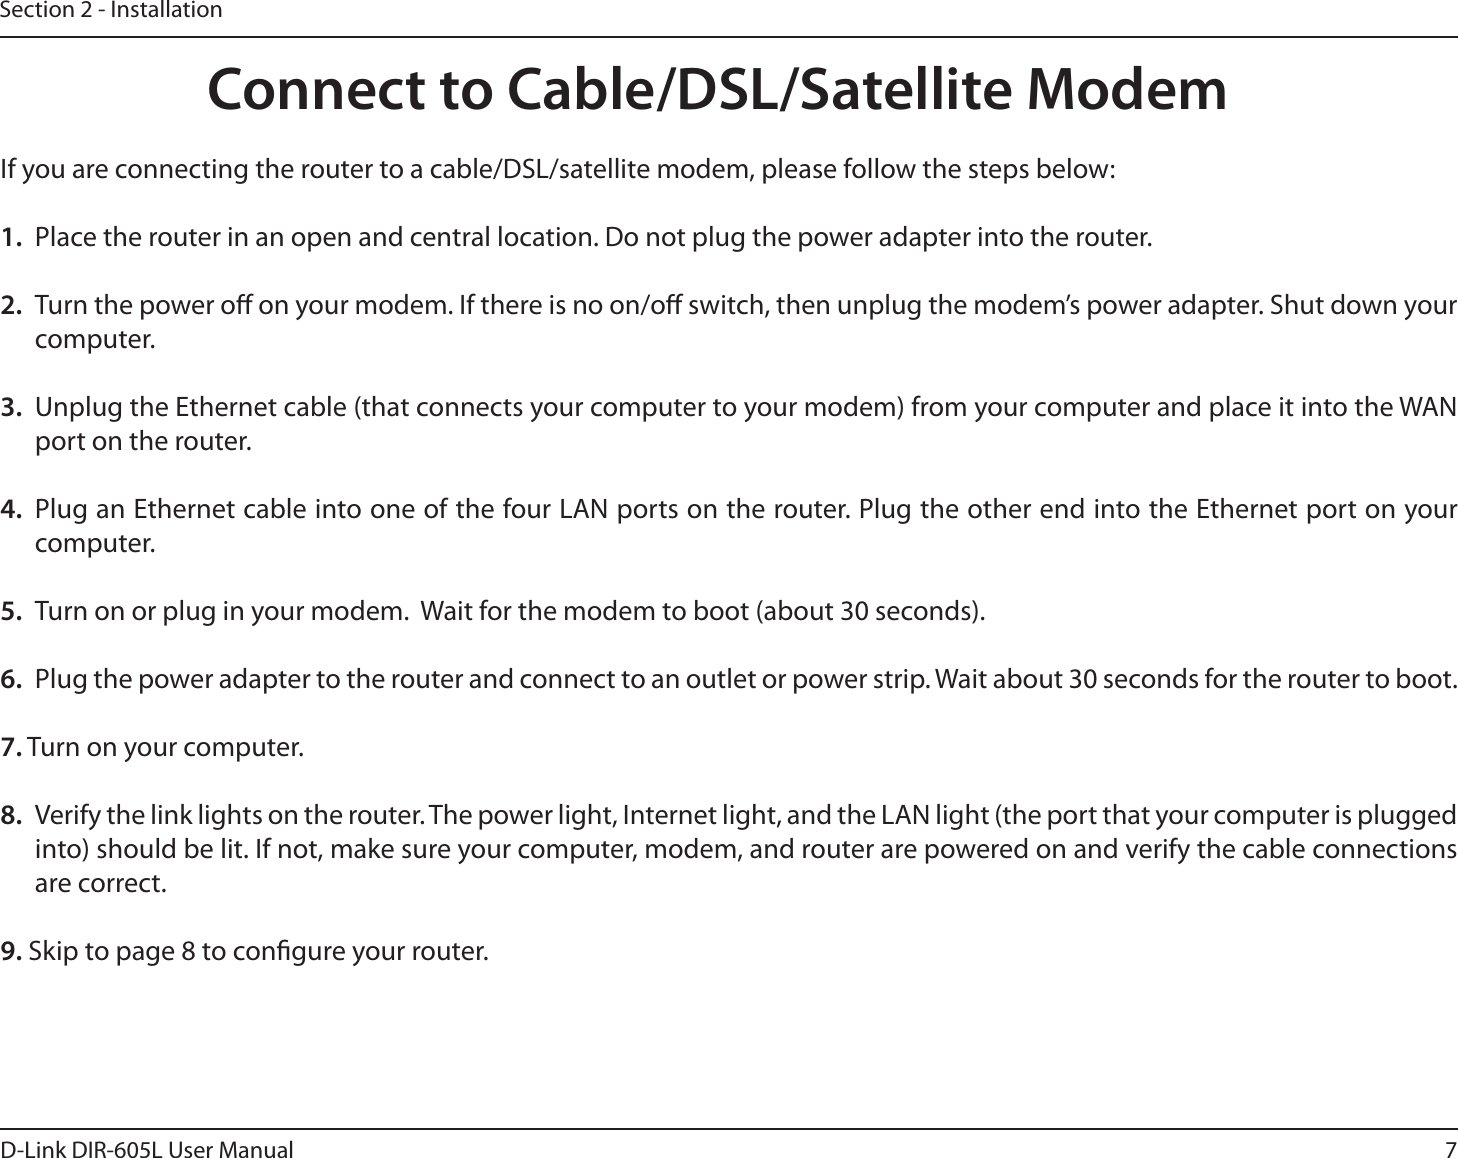 7D-Link DIR-605L User ManualSection 2 - InstallationIf you are connecting the router to a cable/DSL/satellite modem, please follow the steps below:1. Place the router in an open and central location. Do not plug the power adapter into the router. 2. Turn the power o on your modem. If there is no on/o switch, then unplug the modem’s power adapter. Shut down your computer.3. Unplug the Ethernet cable (that connects your computer to your modem) from your computer and place it into the WAN port on the router.  4. Plug an Ethernet cable into one of the four LAN ports on the router. Plug the other end into the Ethernet port on your computer.5. Turn on or plug in your modem.  Wait for the modem to boot (about 30 seconds). 6. Plug the power adapter to the router and connect to an outlet or power strip. Wait about 30 seconds for the router to boot. 7. Turn on your computer.  Verify the link lights on the router. The power light, Internet light, and the LAN light (the port that your computer is plugged into) should be lit. If not, make sure your computer, modem, and router are powered on and verify the cable connections are correct. 9. Skip to page 8 to congure your router. Connect to Cable/DSL/Satellite Modem